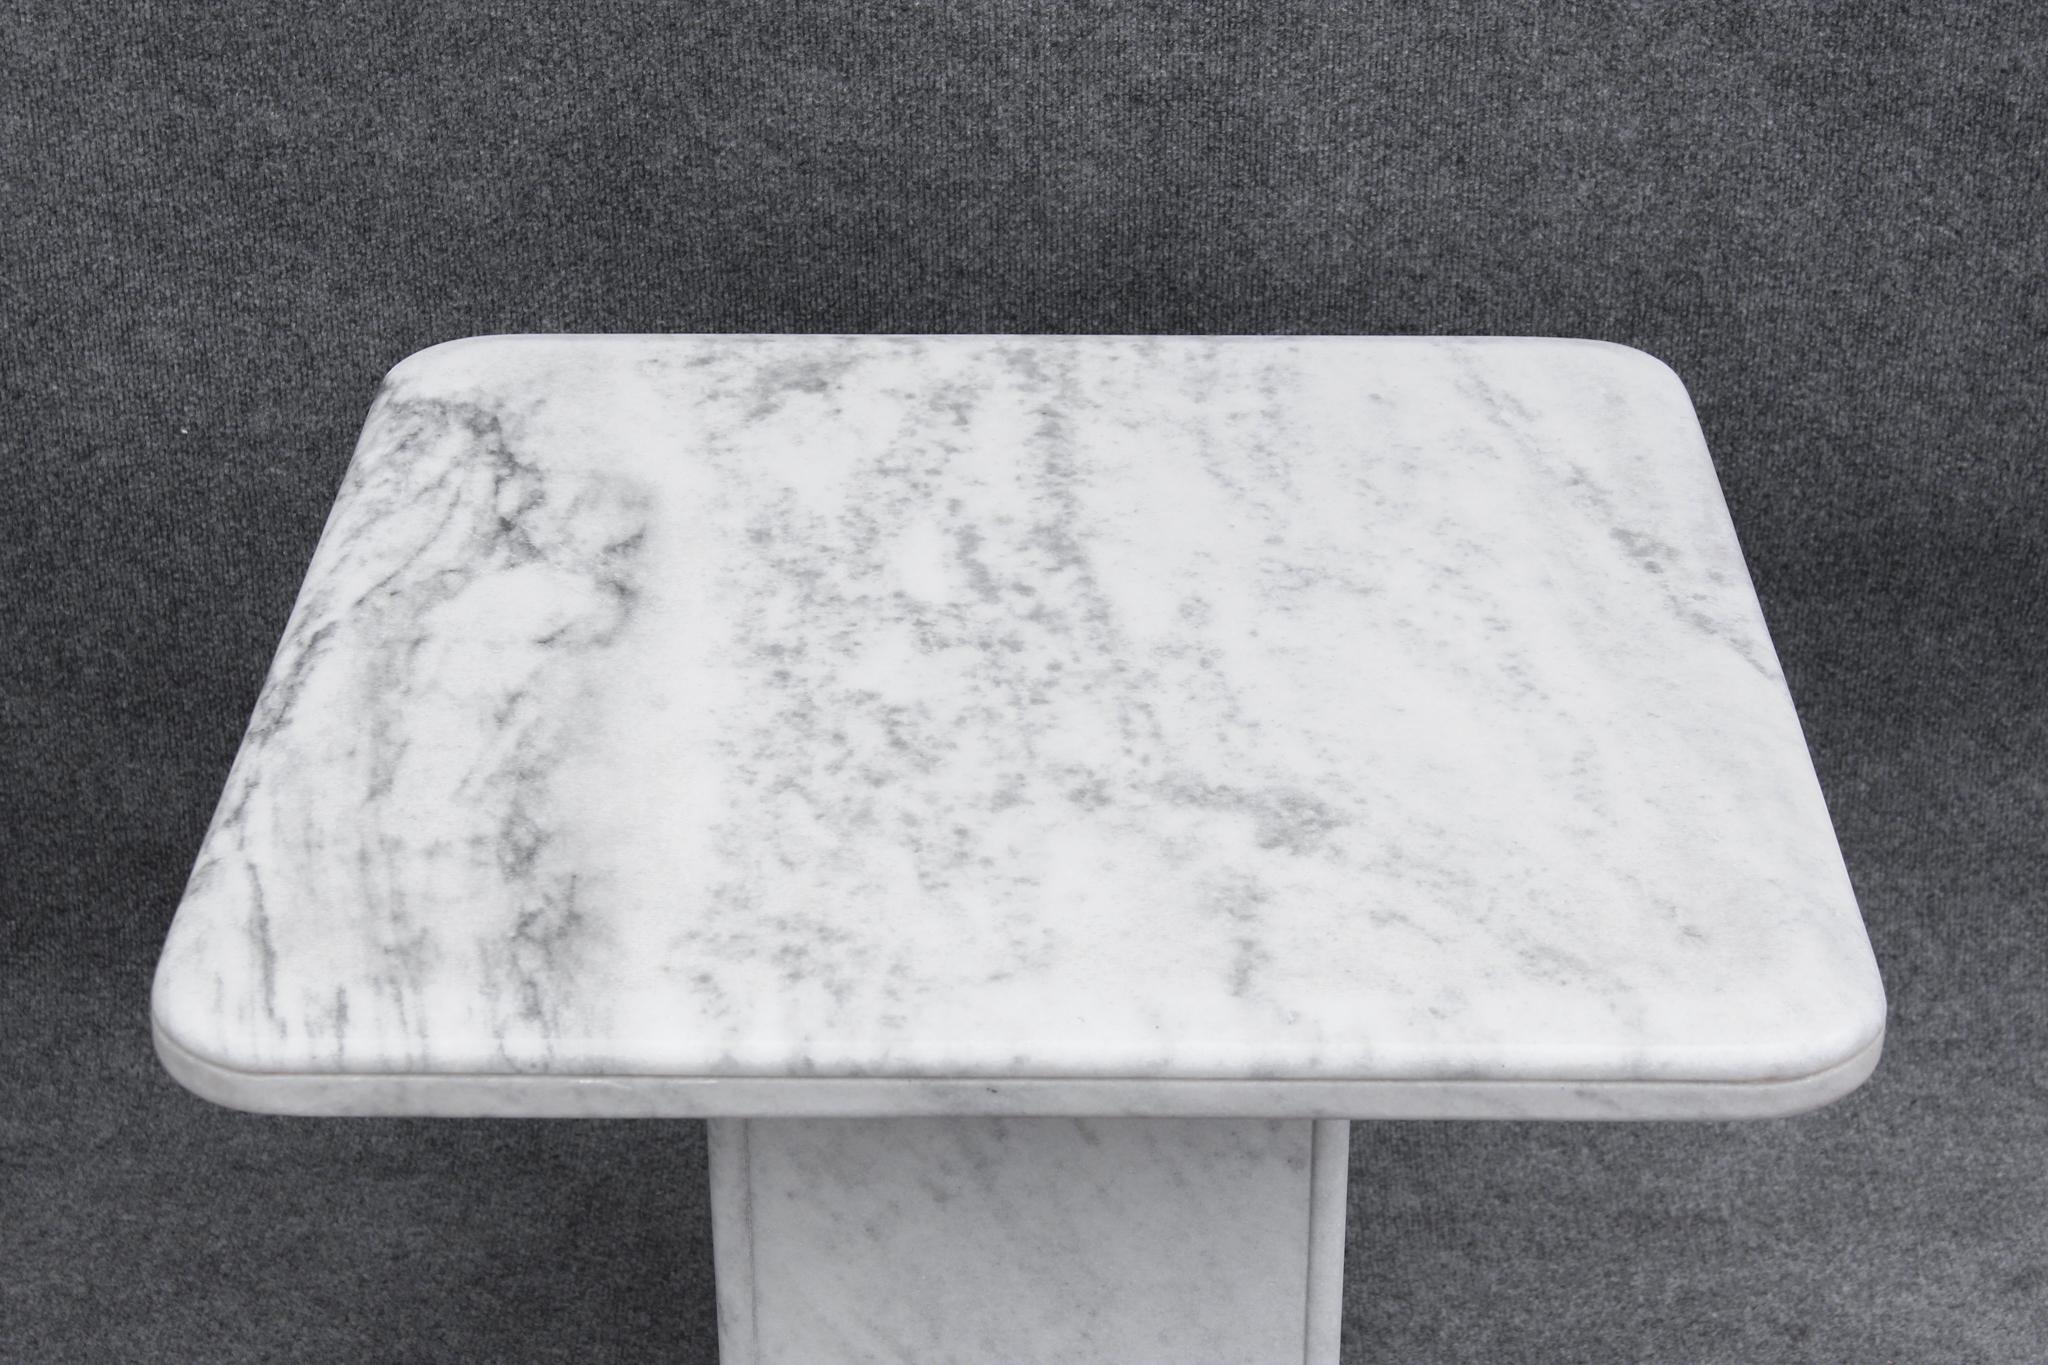 Made in Italy around the 1970s, these tables feature thick marble construction with exciting graining. While tough to say what marble it is, it reminds us of a cross between thassos and arabescato, two of the most popular types. Care was also taken